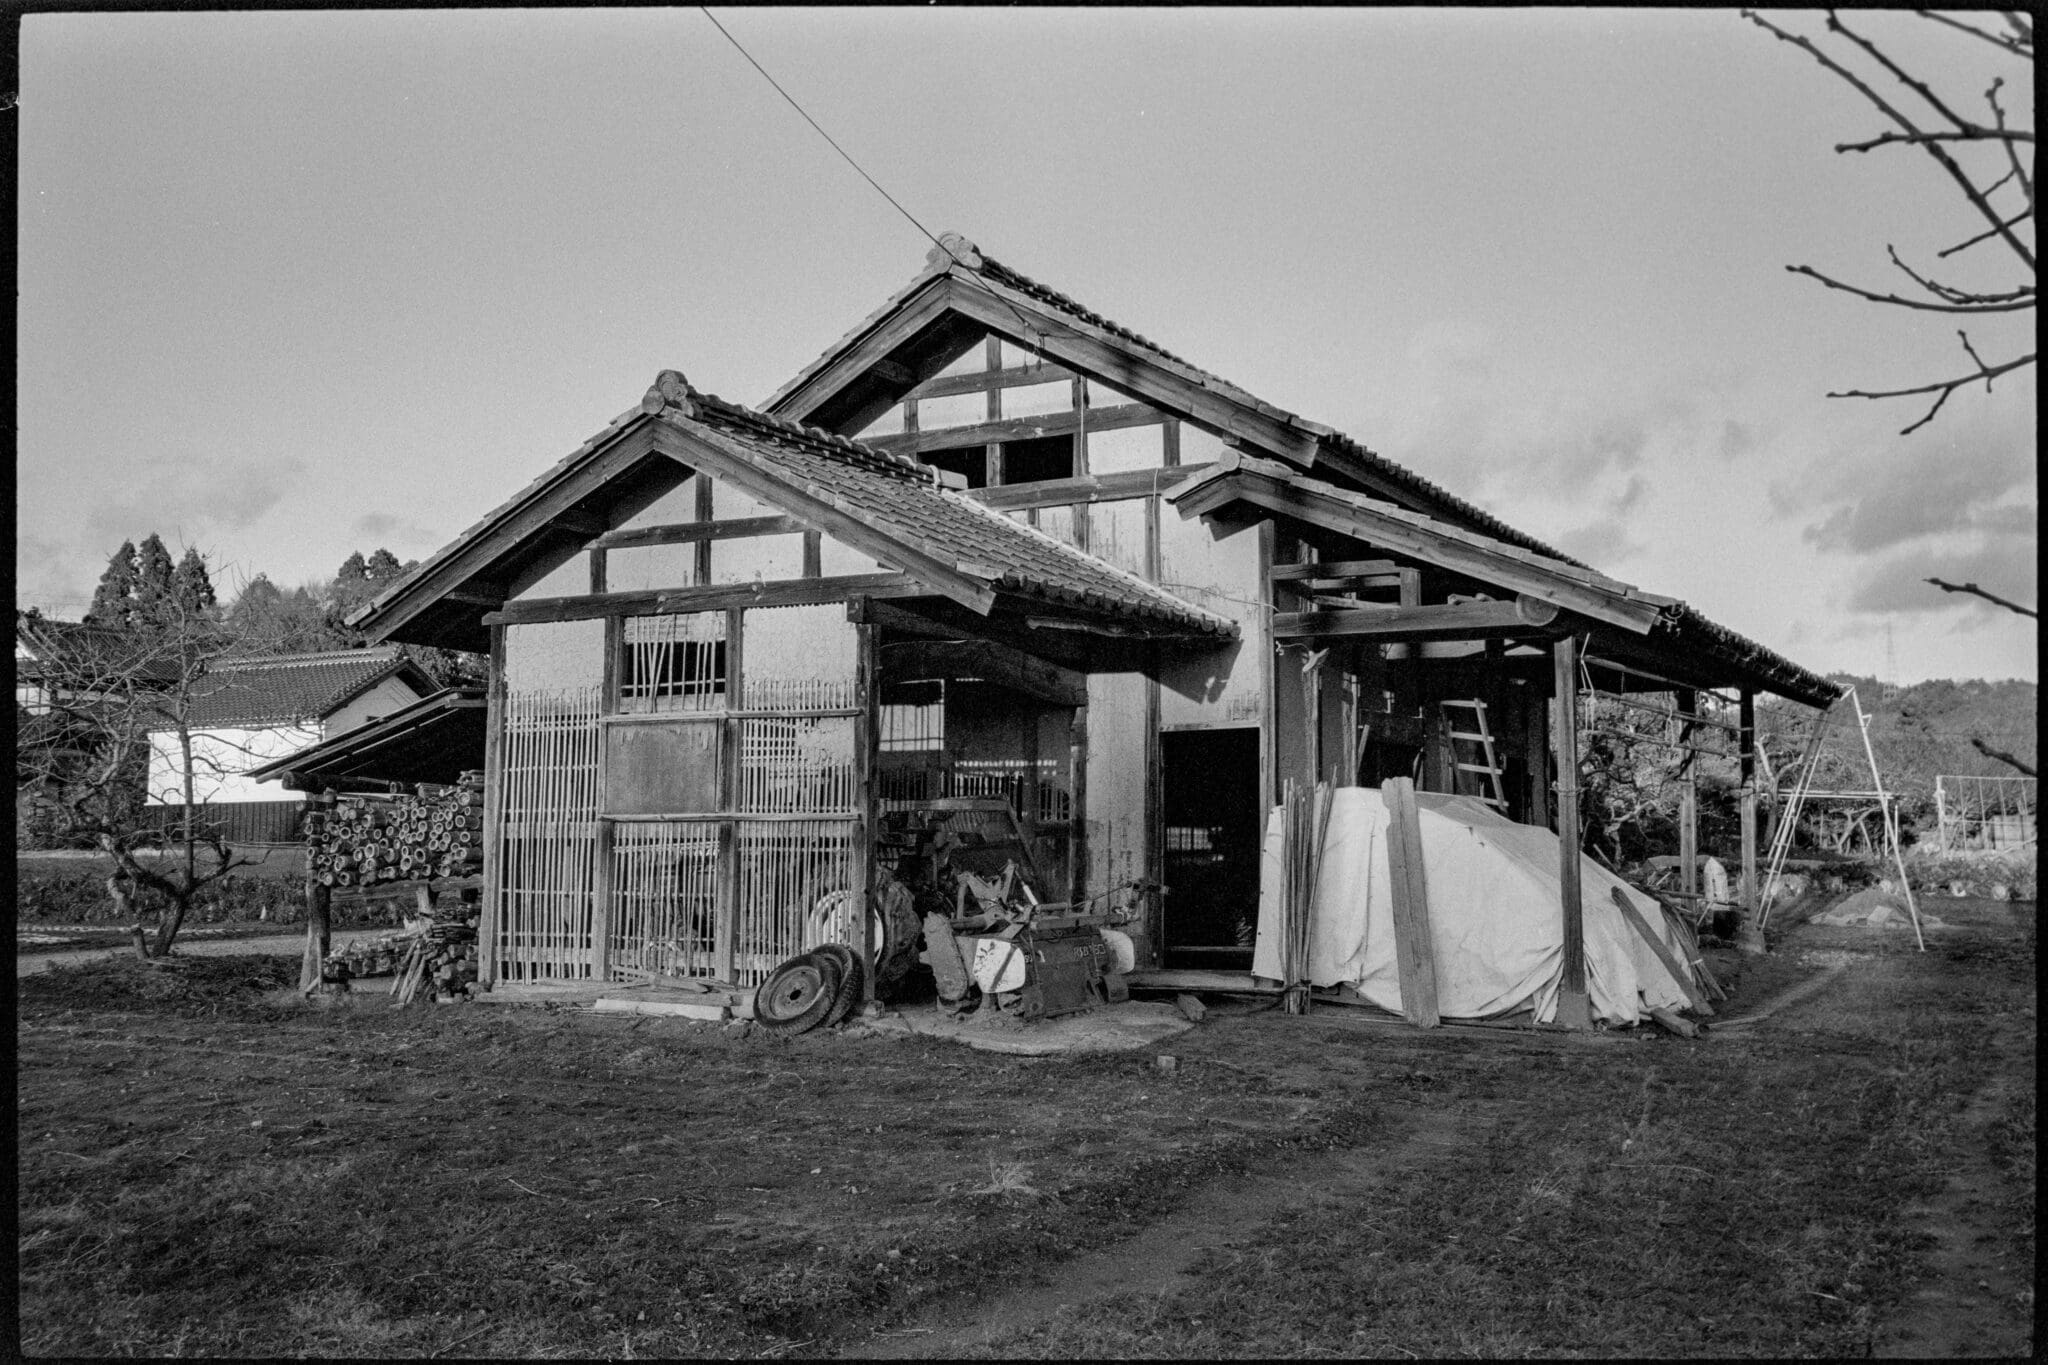 Black and white photo of an old, traditional rural house with scattered farming equipment.